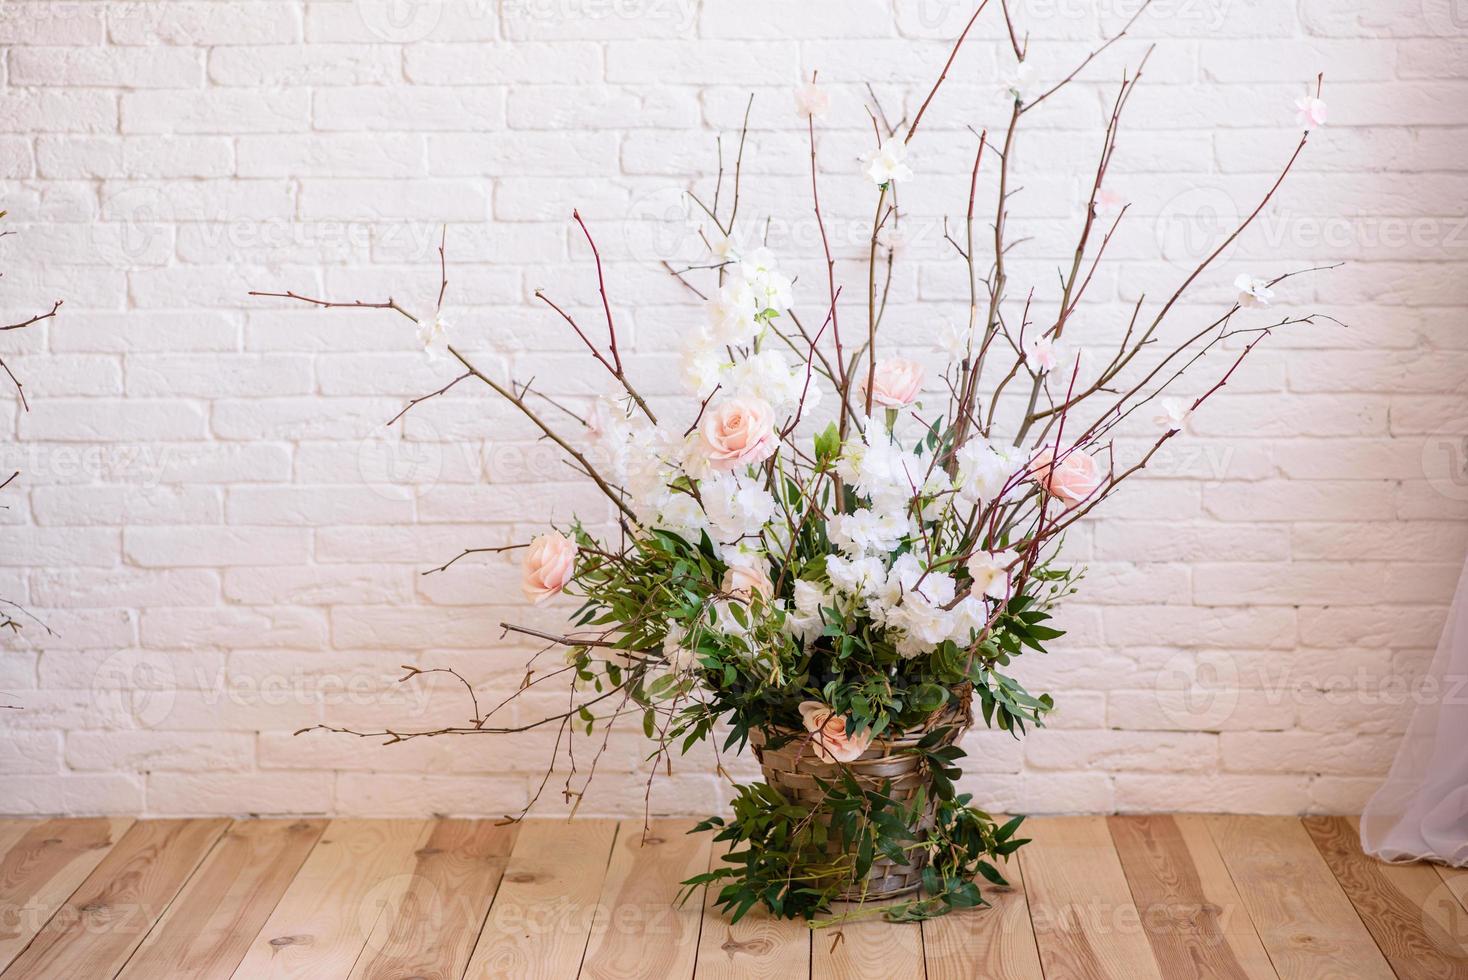 Decorations of branches with beautiful pink and white flowers in the basket against the background of a white brick wall photo